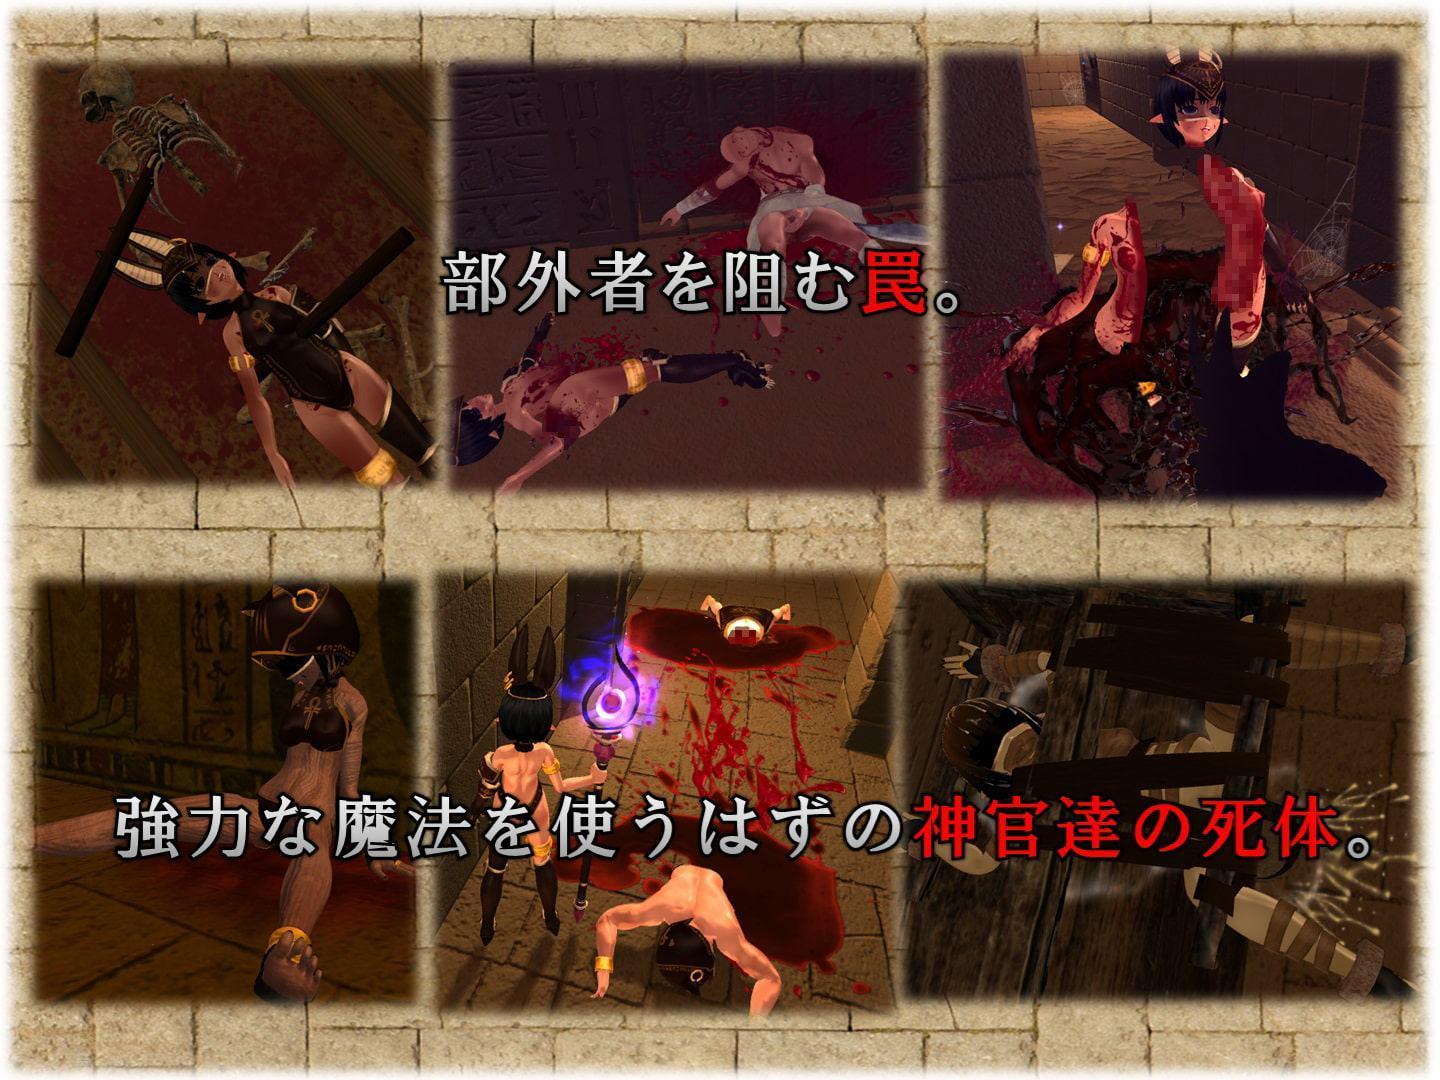 Dungeon of Revival 復活のダンジョン